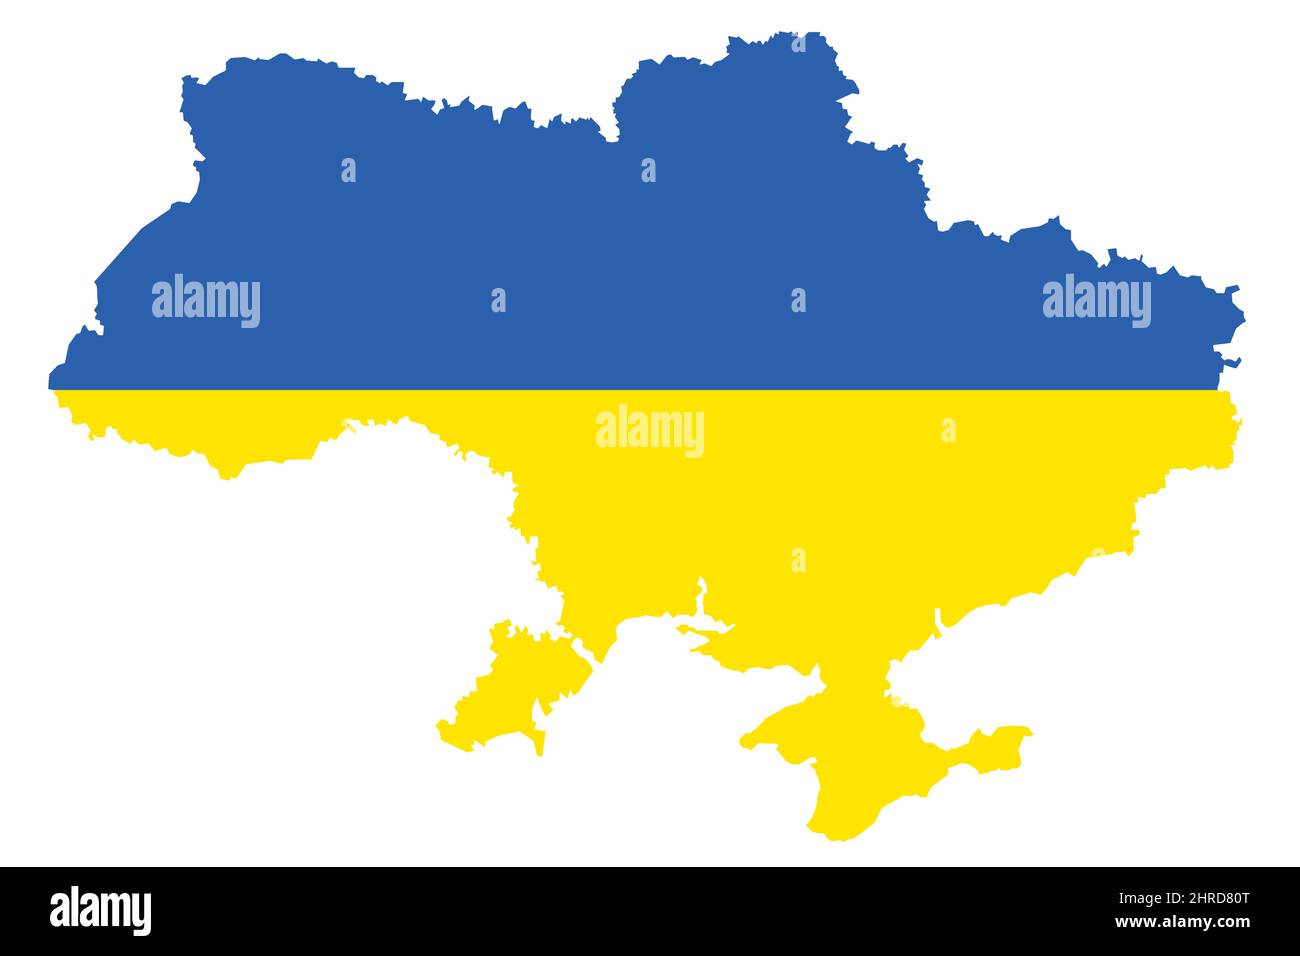 Ukraine map illustration in national blue and yellow colors isolated on white Stock Photo